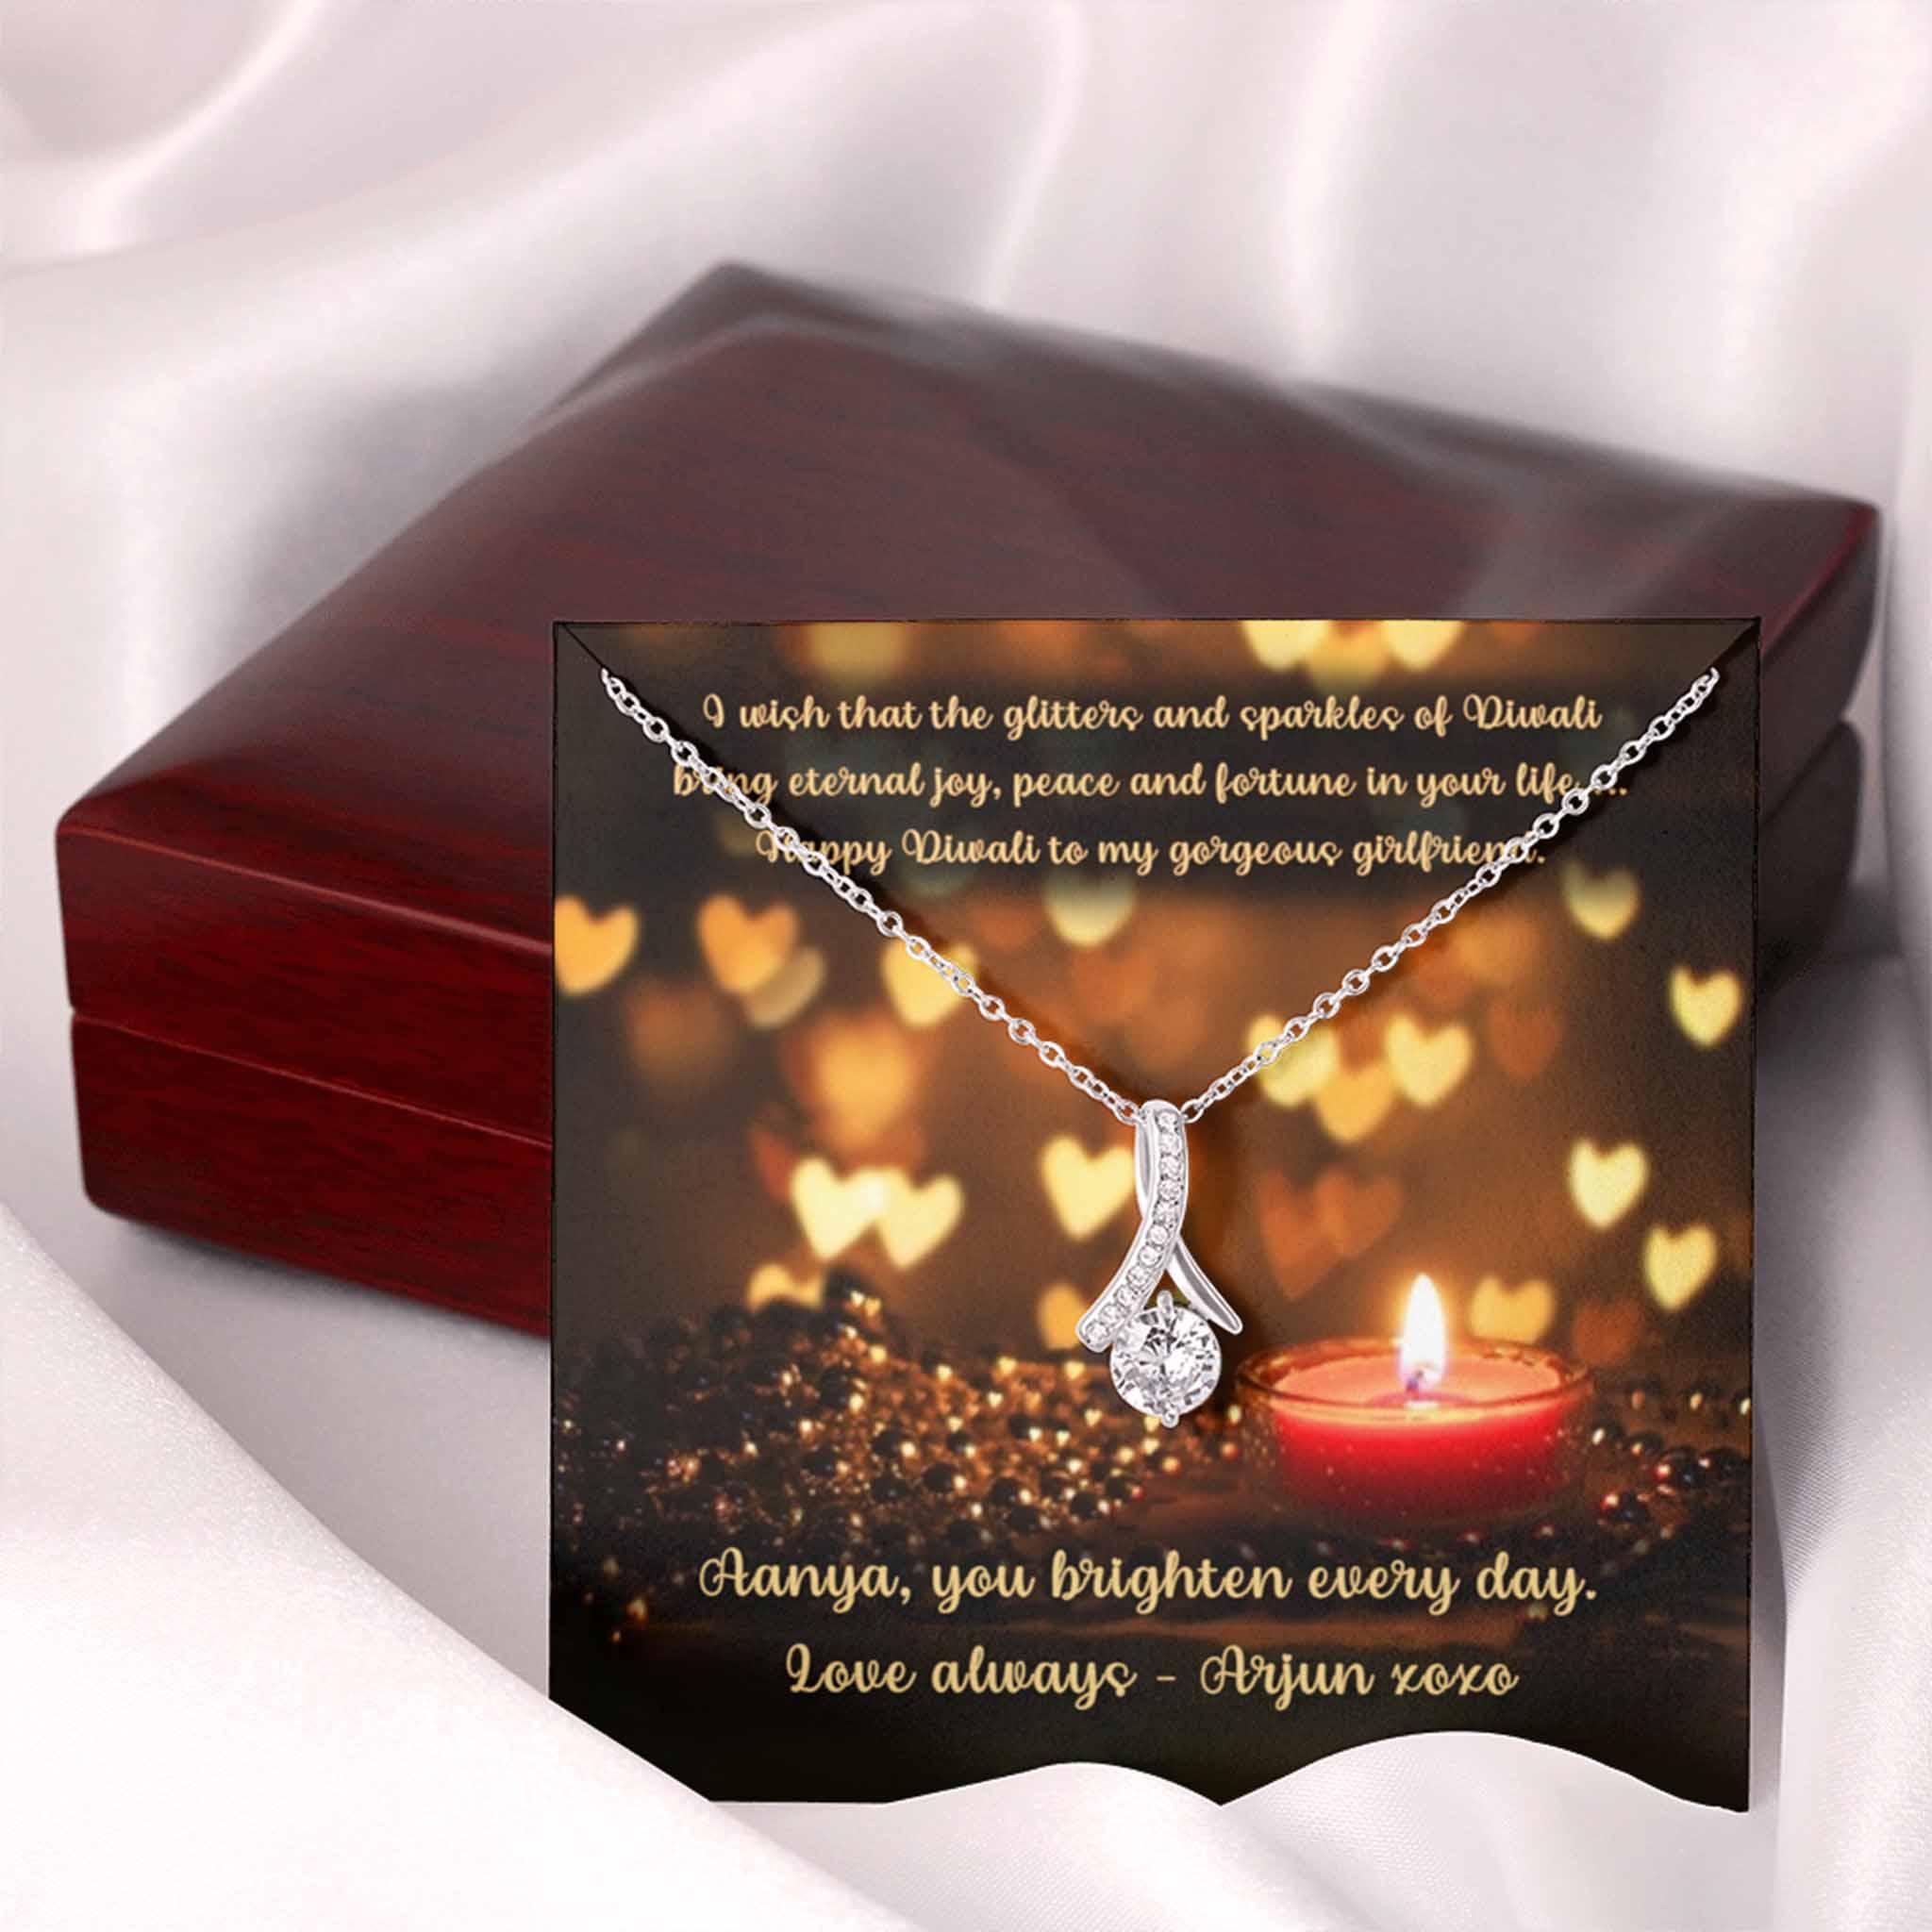 Alluring Beauty Necklace Girlfriend Happy Diwali v5 Personalized Insert CardCustomly Gifts